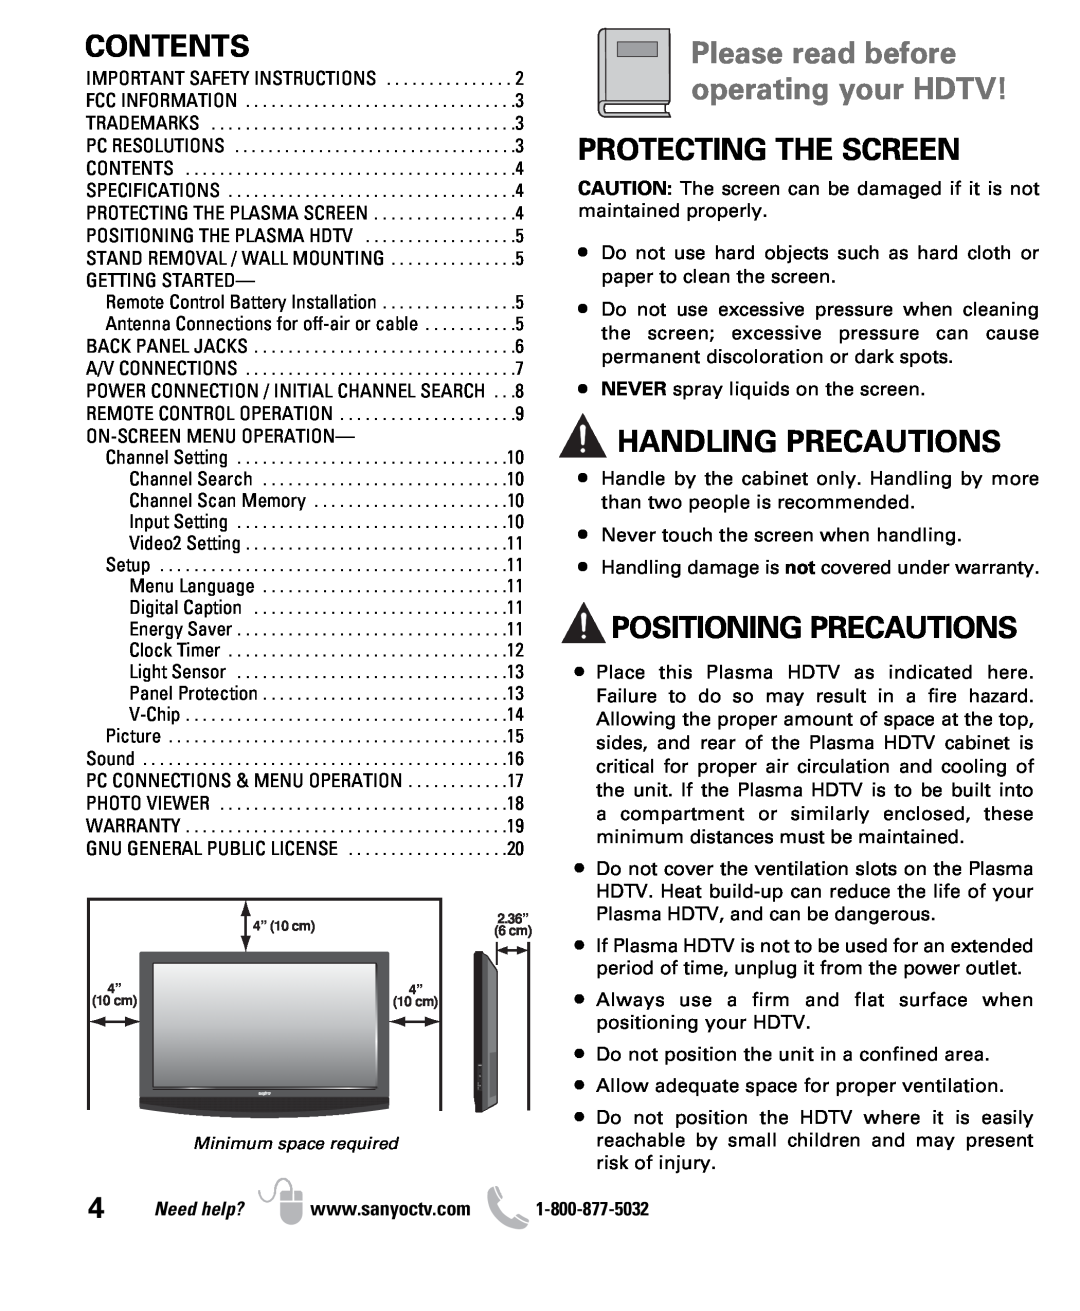 Sanyo DP50710 owner manual Contents, Protecting The Screen, Handling Precautions, Positioning Precautions, Need help? 